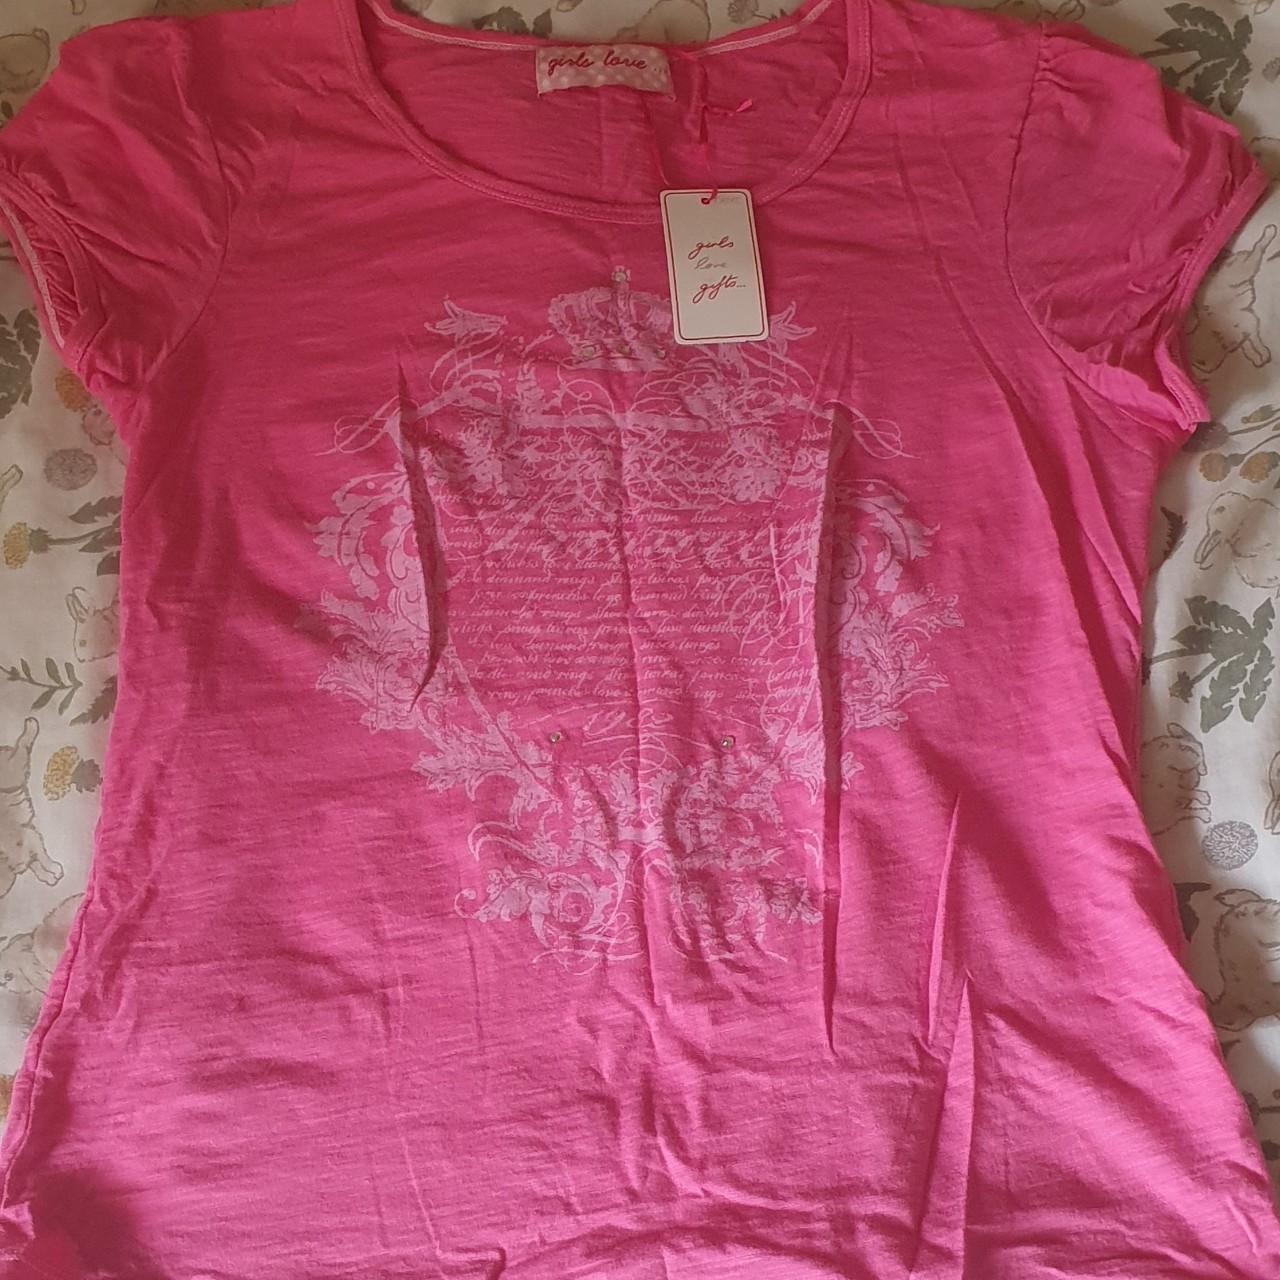 Amazing Y2K mcling style top from Next Still has... - Depop